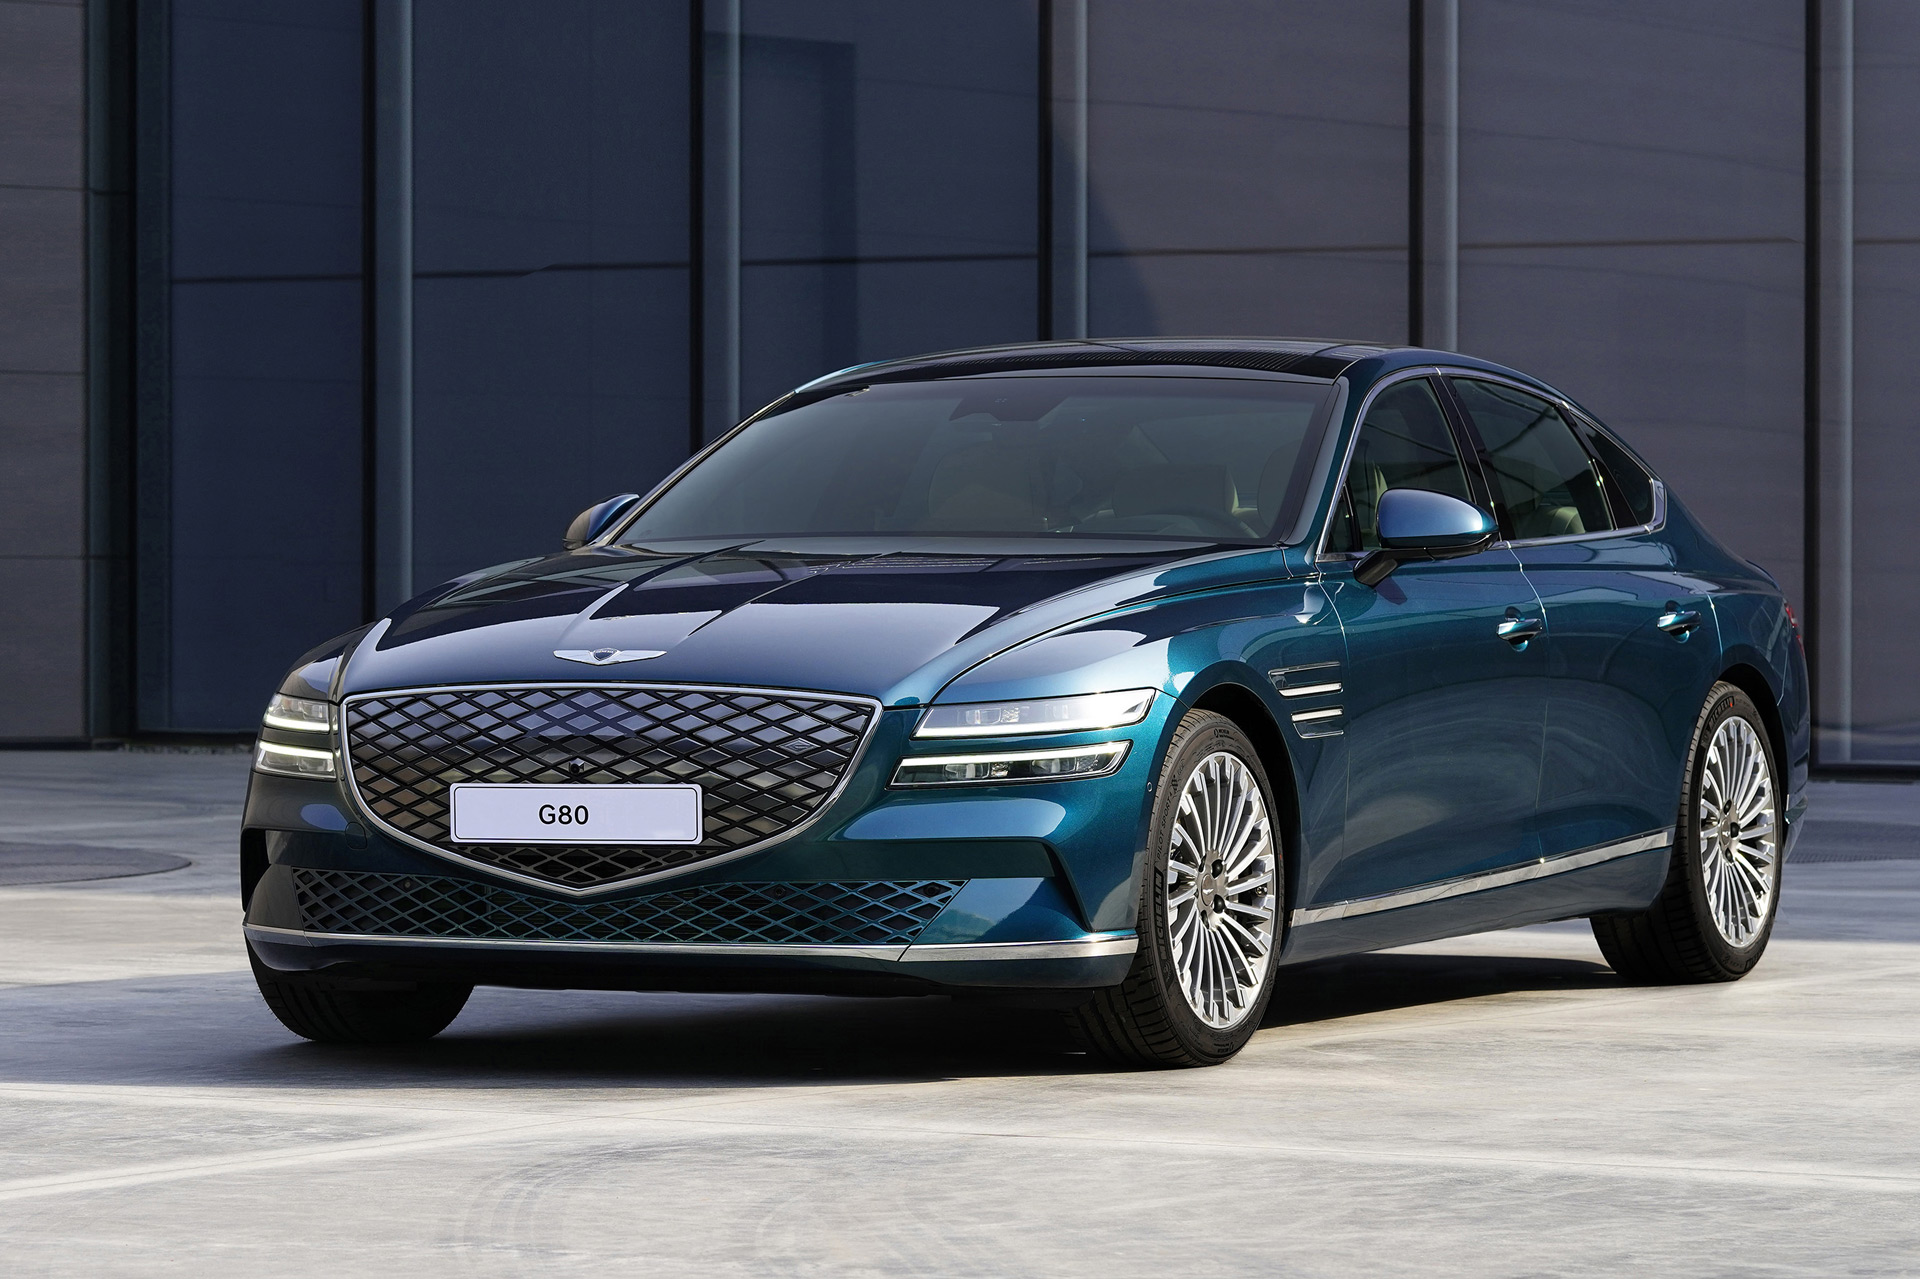 Report: Hyundai's Genesis is backpedaling on all-EV plan, to hybrids